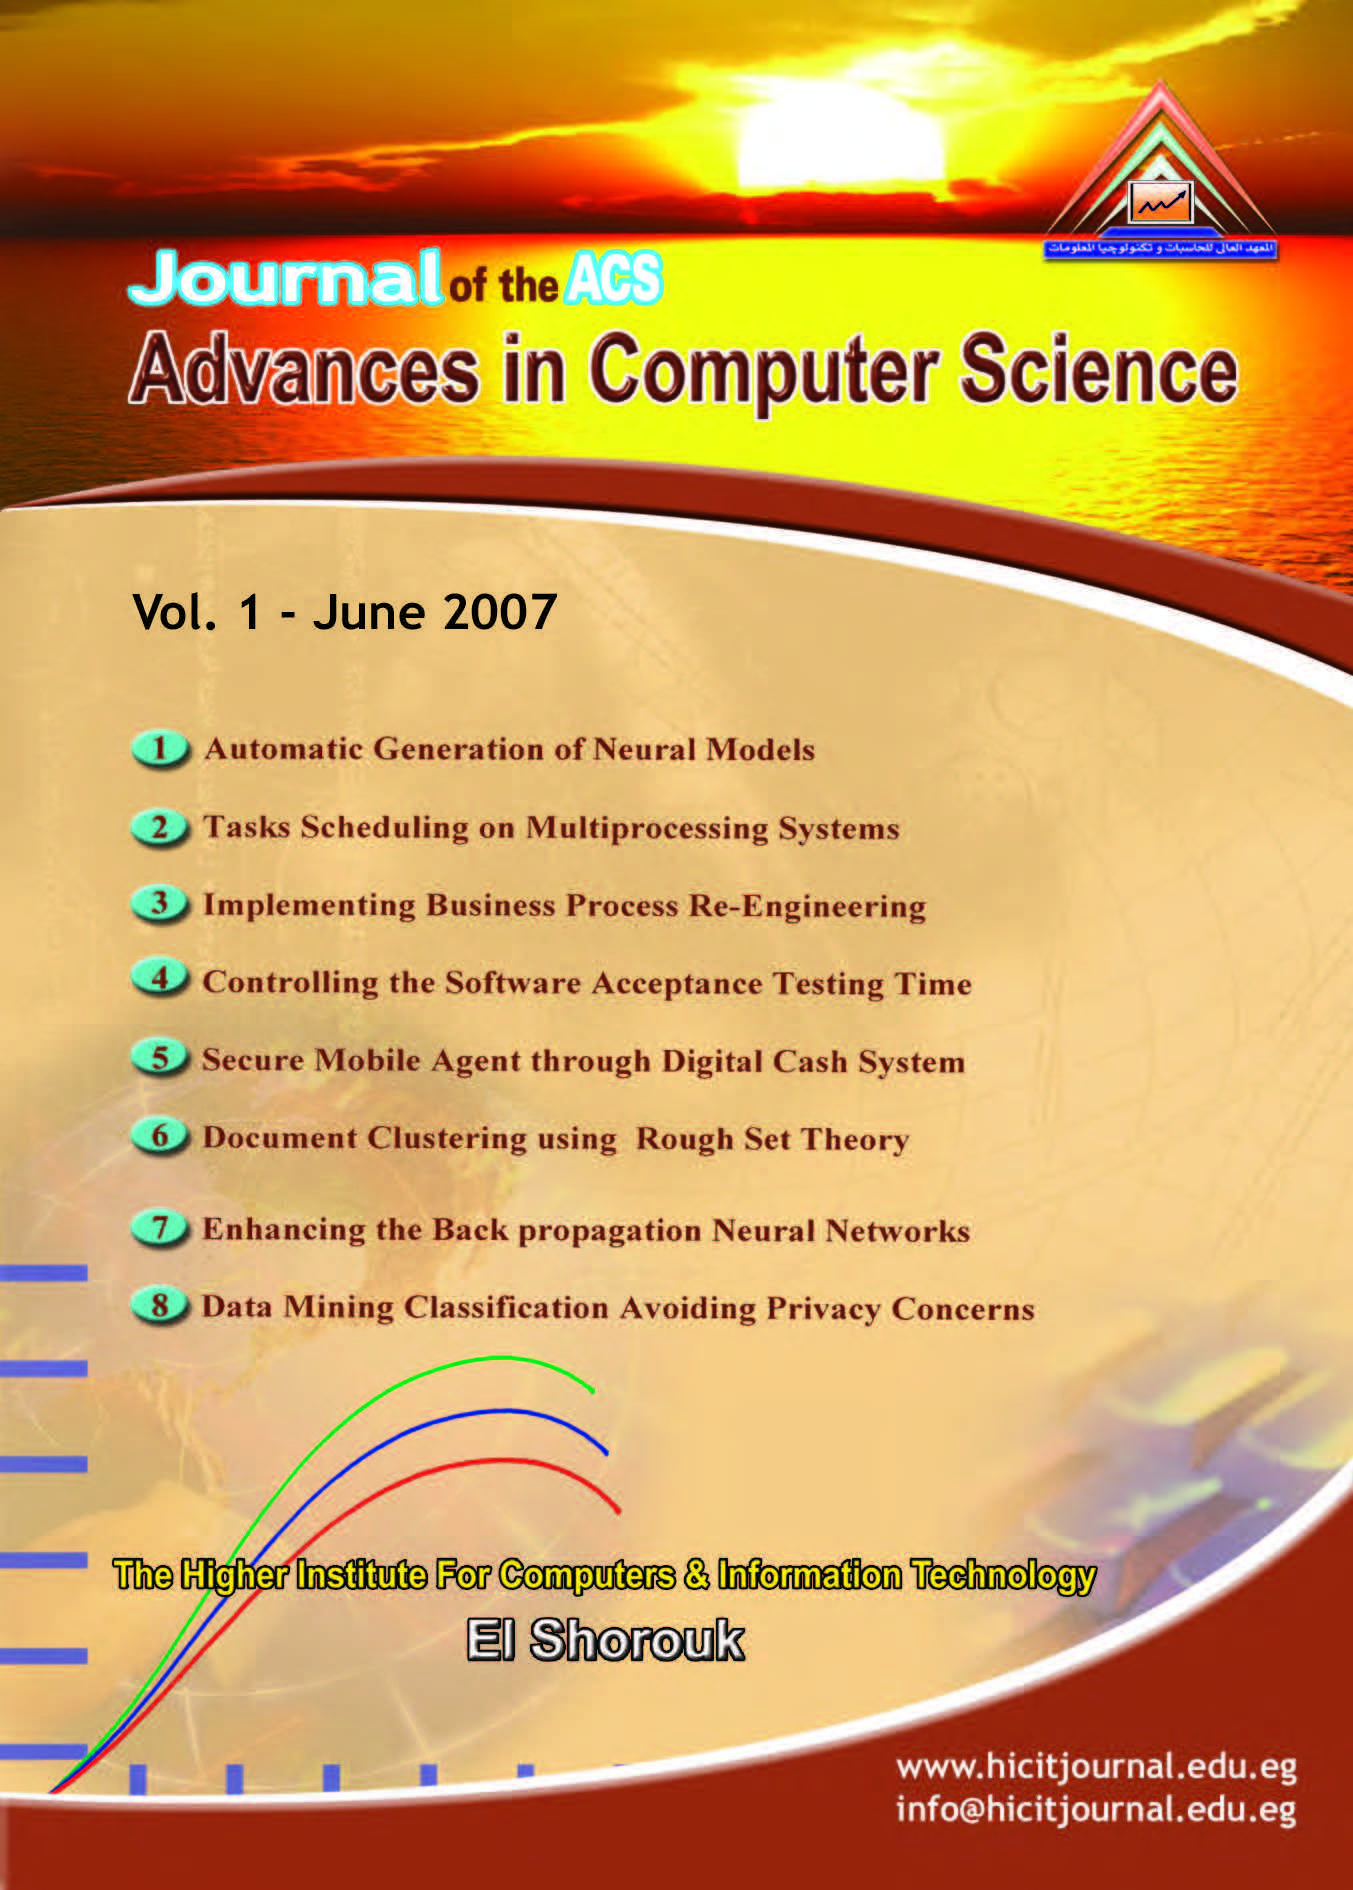 Journal of the ACS Advances in Computer Science